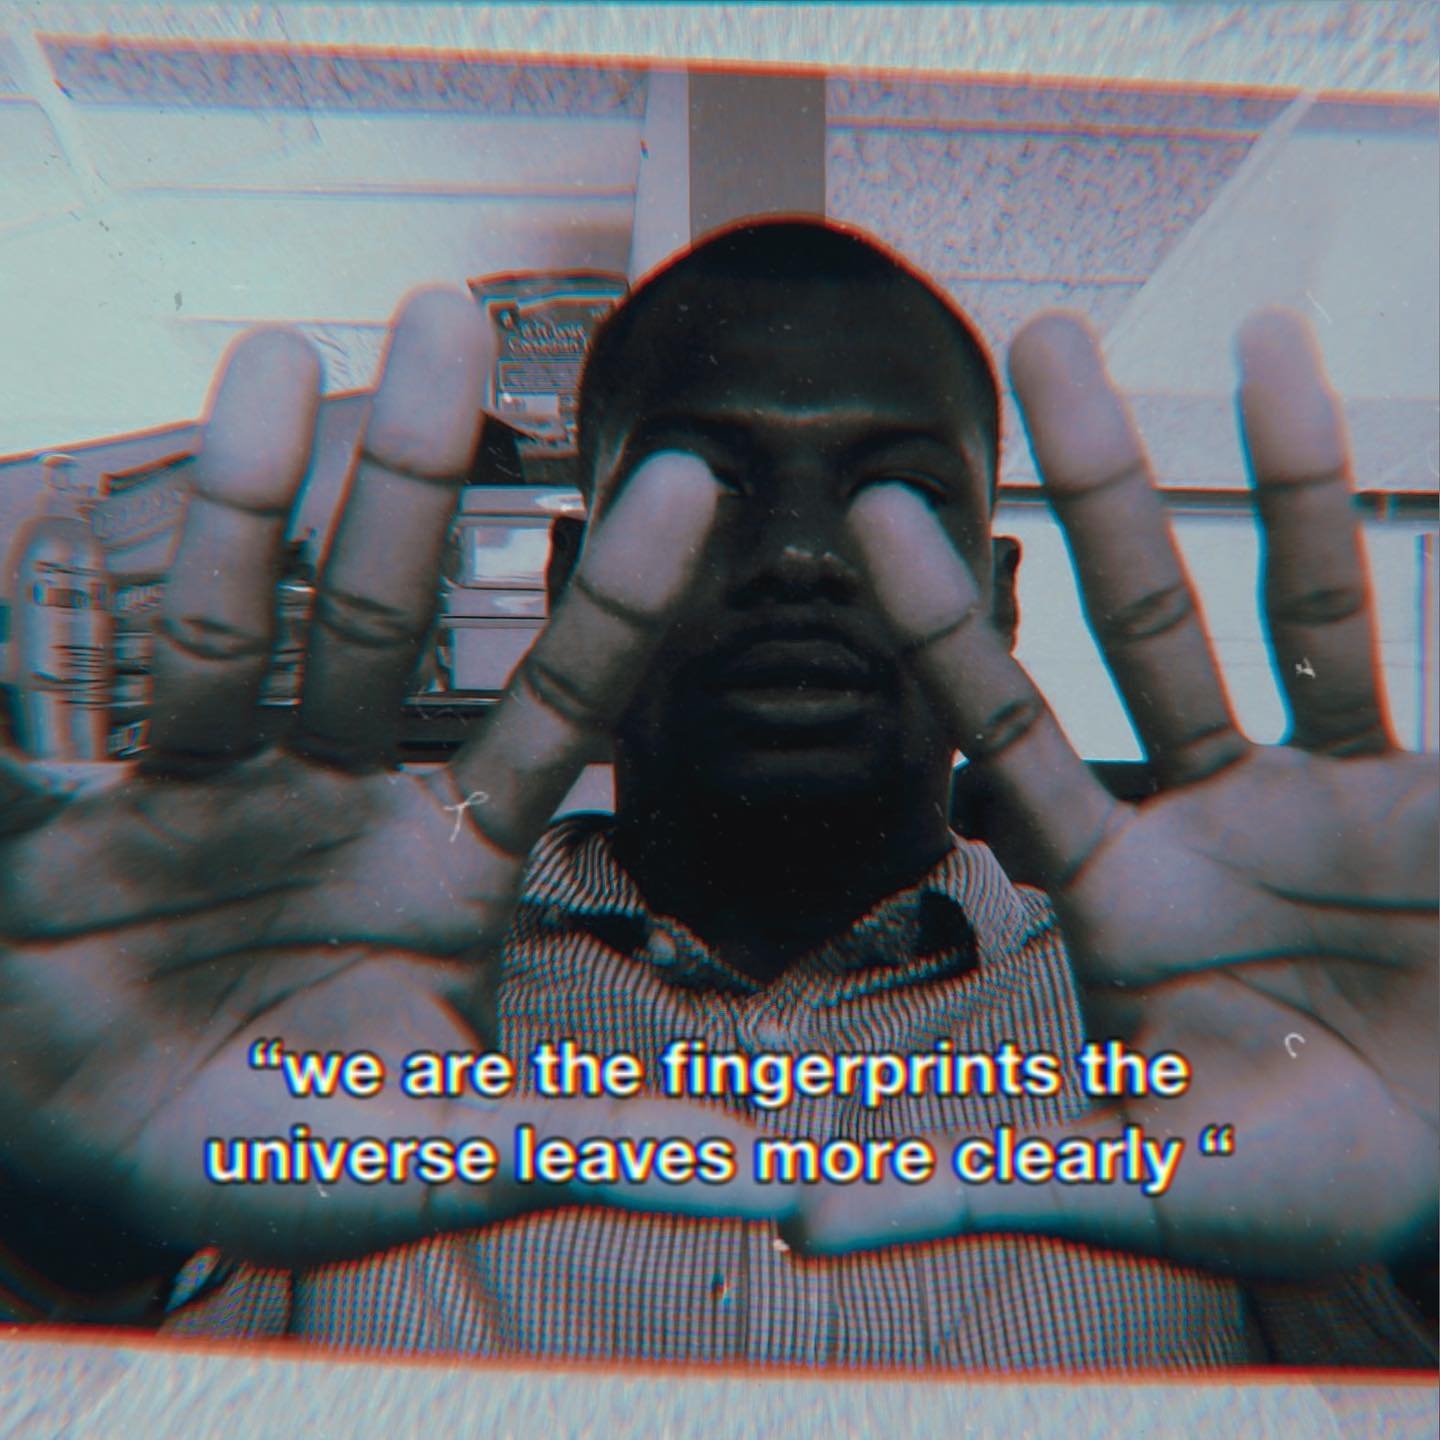 &hellip;with these hands &ldquo;I Am&hellip;&rdquo; 🙌🏾🌻

#writer #storytelling #photography #video #audio #print #marketplace #goodvibes2ulove